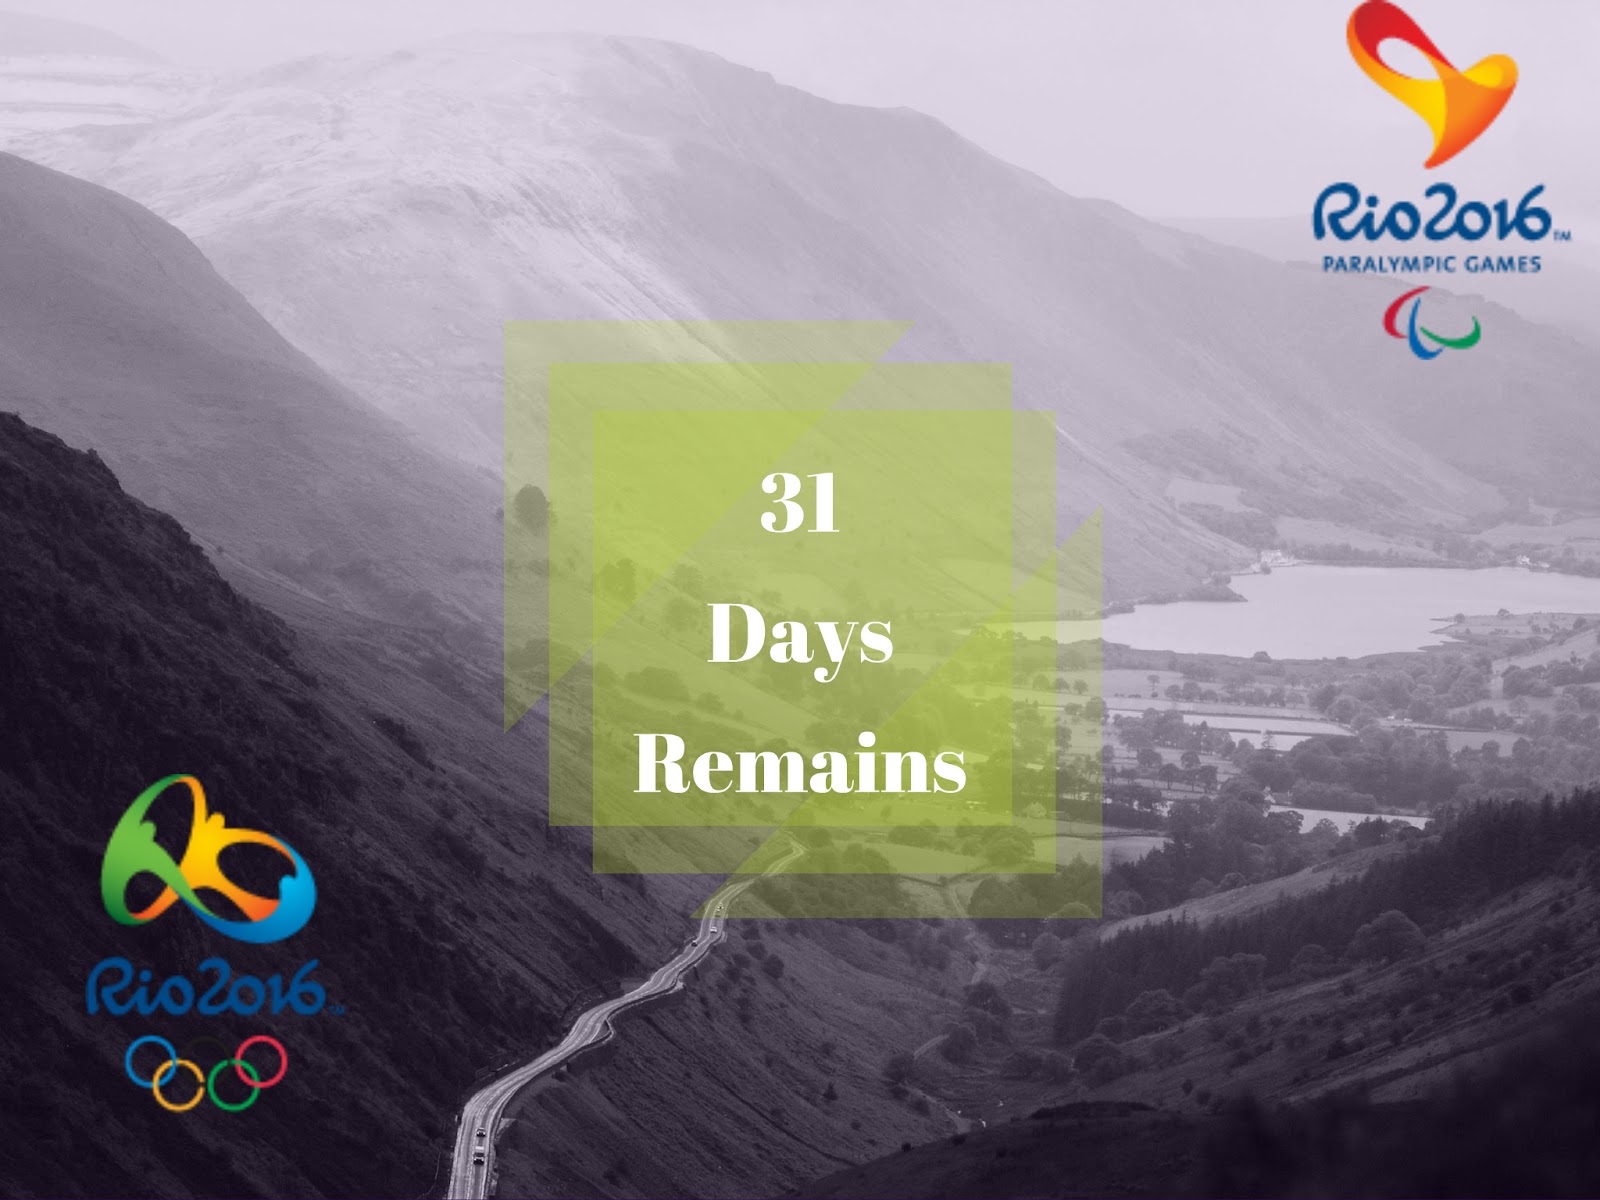 Count Down Timer Wallpaper For Rio Olympic